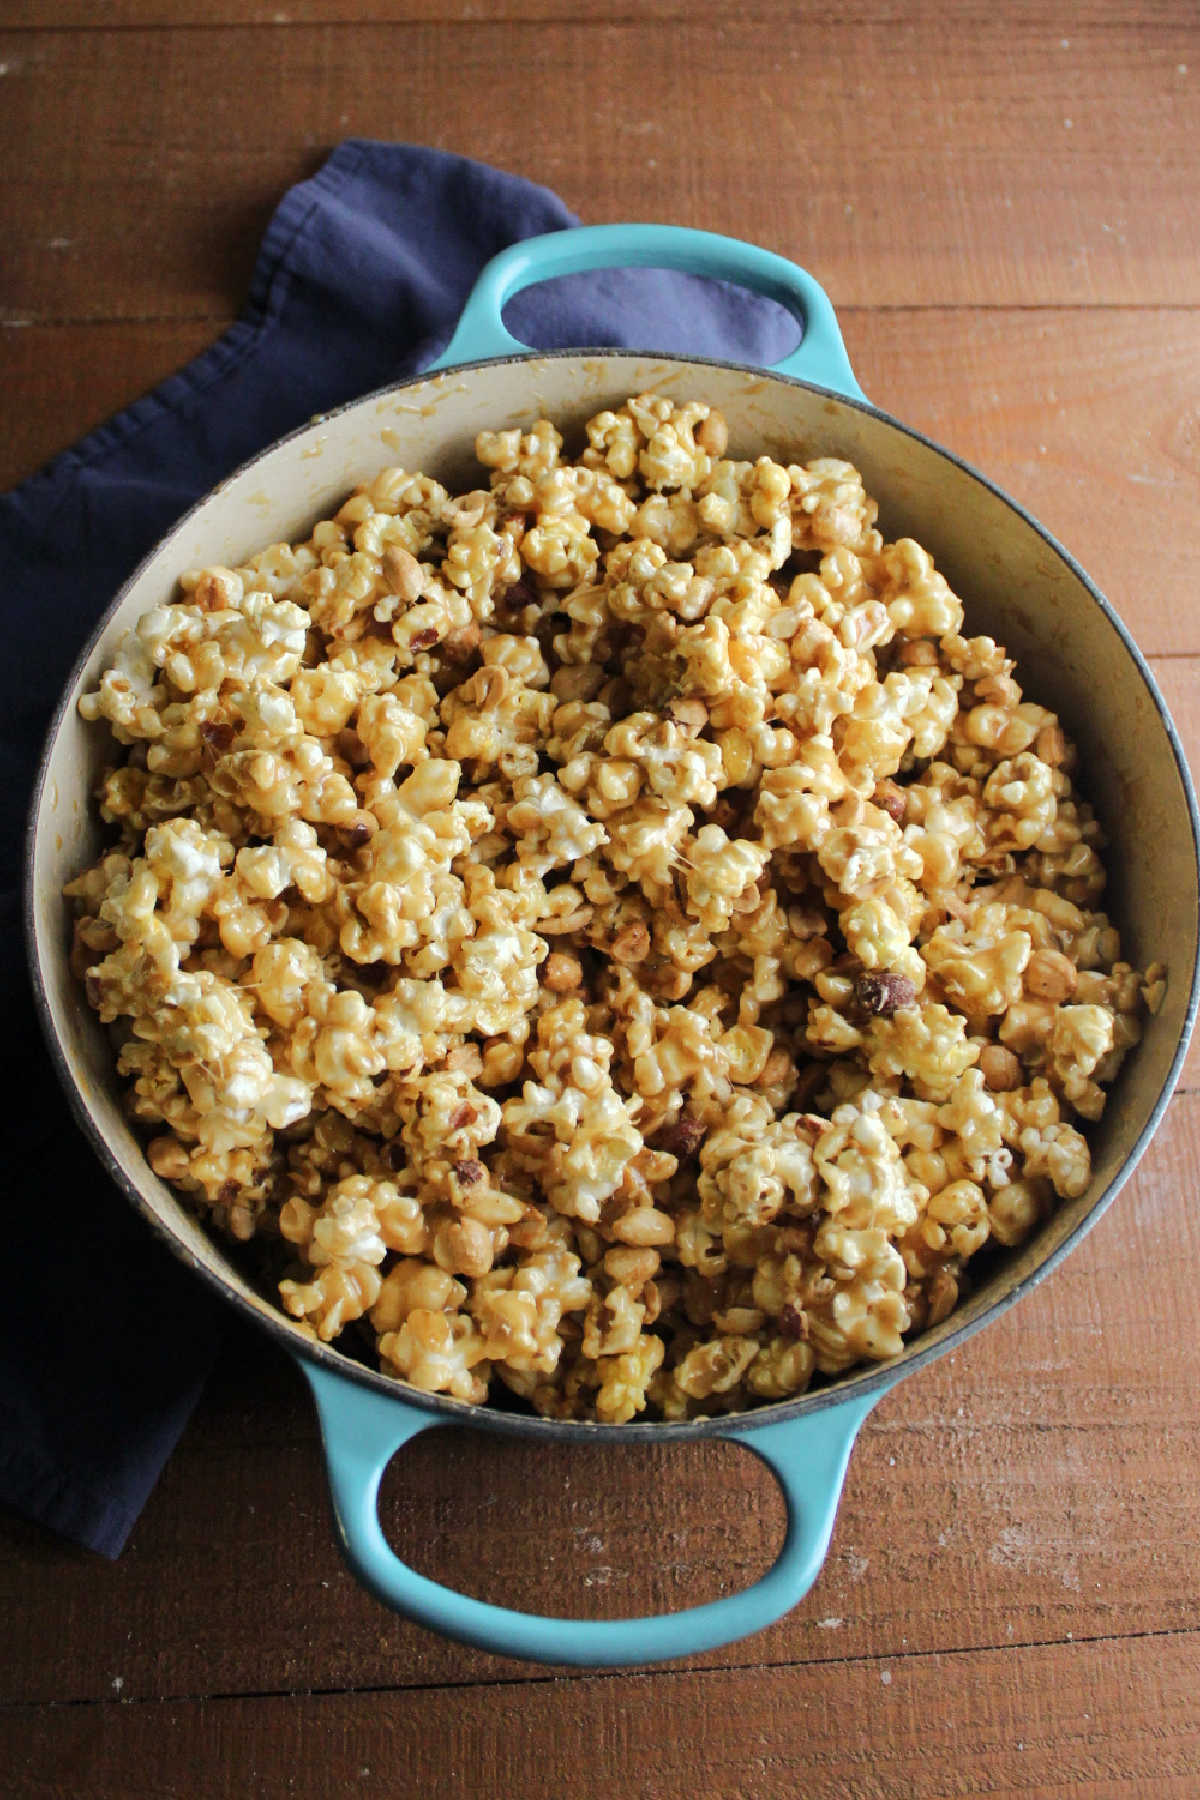 Dutch oven filled with popcorn and peanuts coated in chewy caramel mixture, ready to be spread out on baking pans to go in the oven.